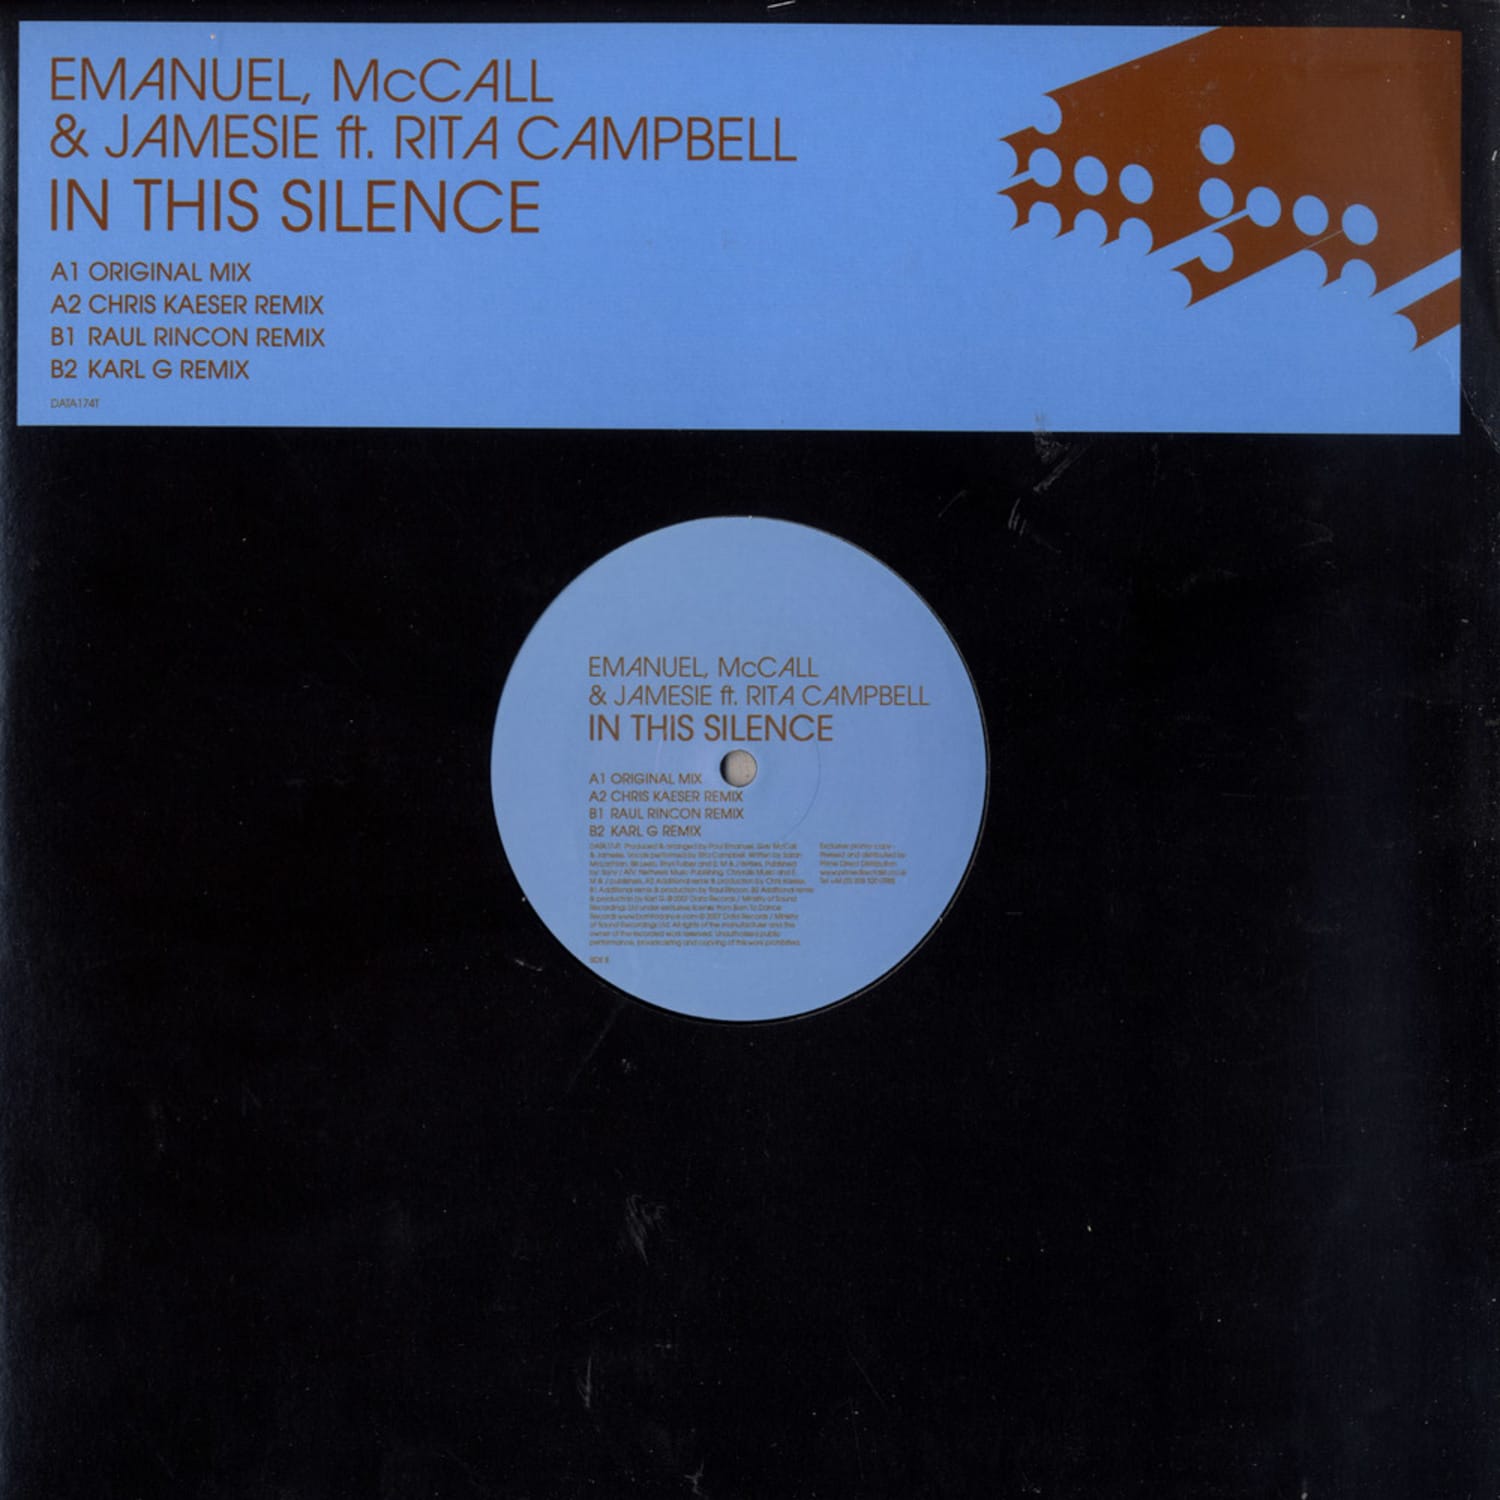 Emanuel Mccall - IN THIS SILENCE